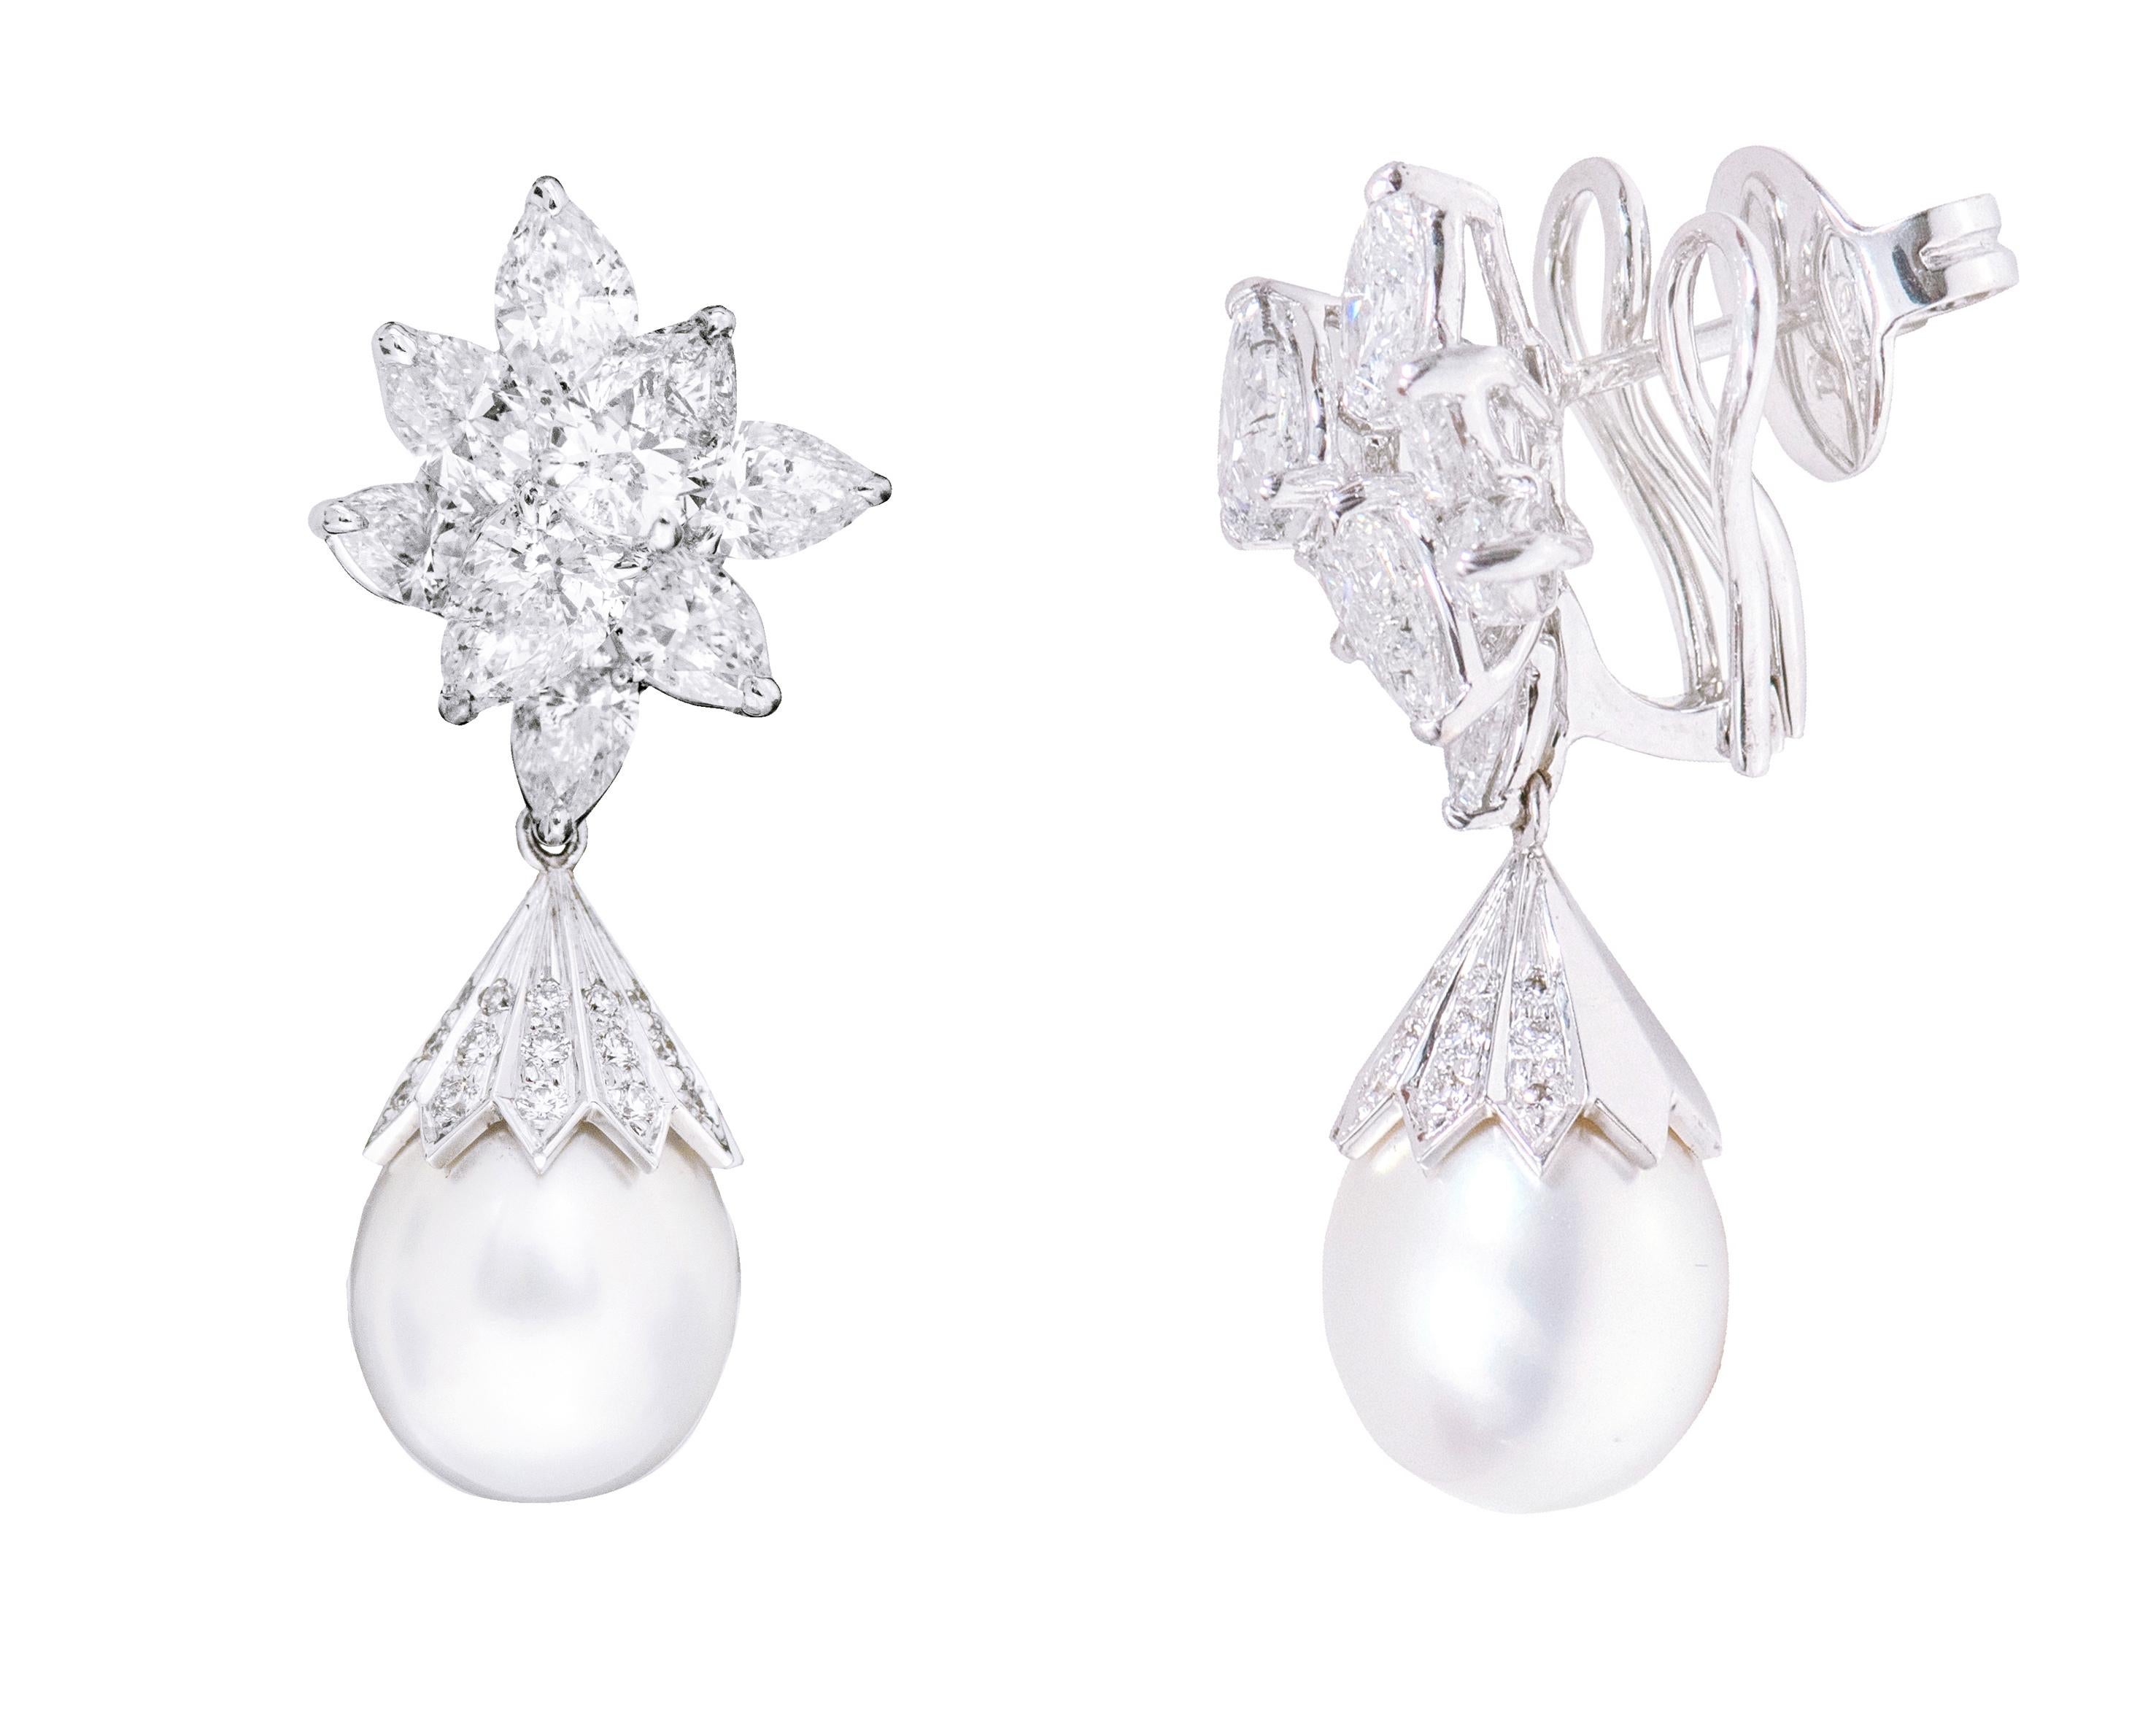 18 Karat White Gold 23.84 Carat Diamond and Pearl Modulation Drop Earrings

This incredible fancy pear shaped diamond and pearl drop earring is vividly magical. The design is magnificently created in various levels layered one over the other in